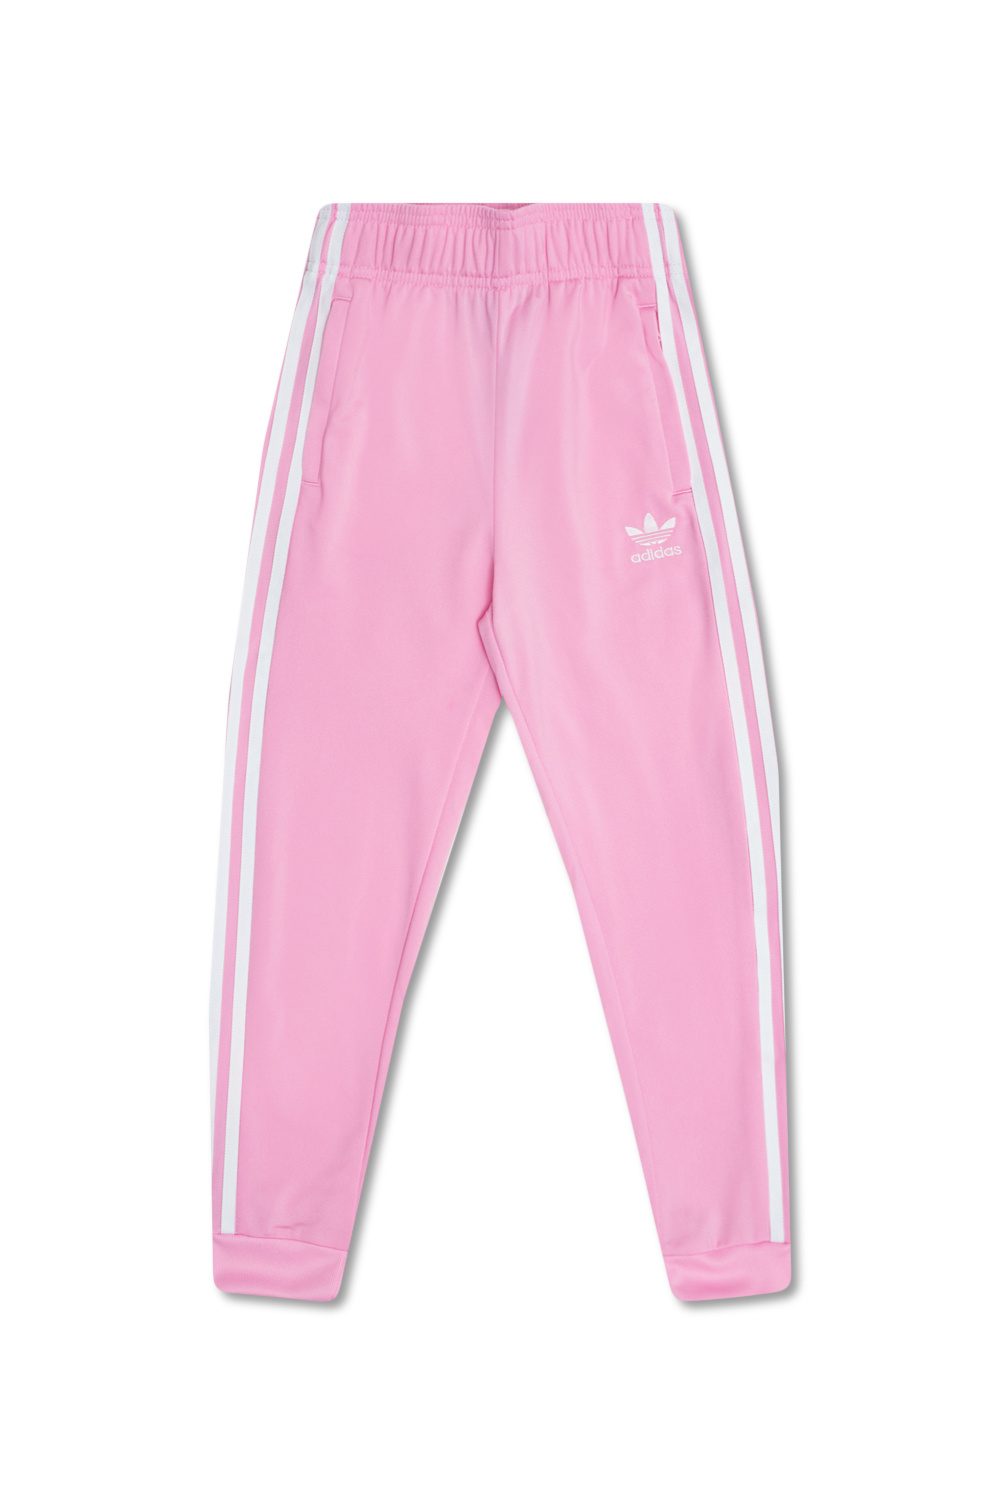 ADIDAS Kids Sweatpants with logo | Kids's Girls clothes (4-14 years ...